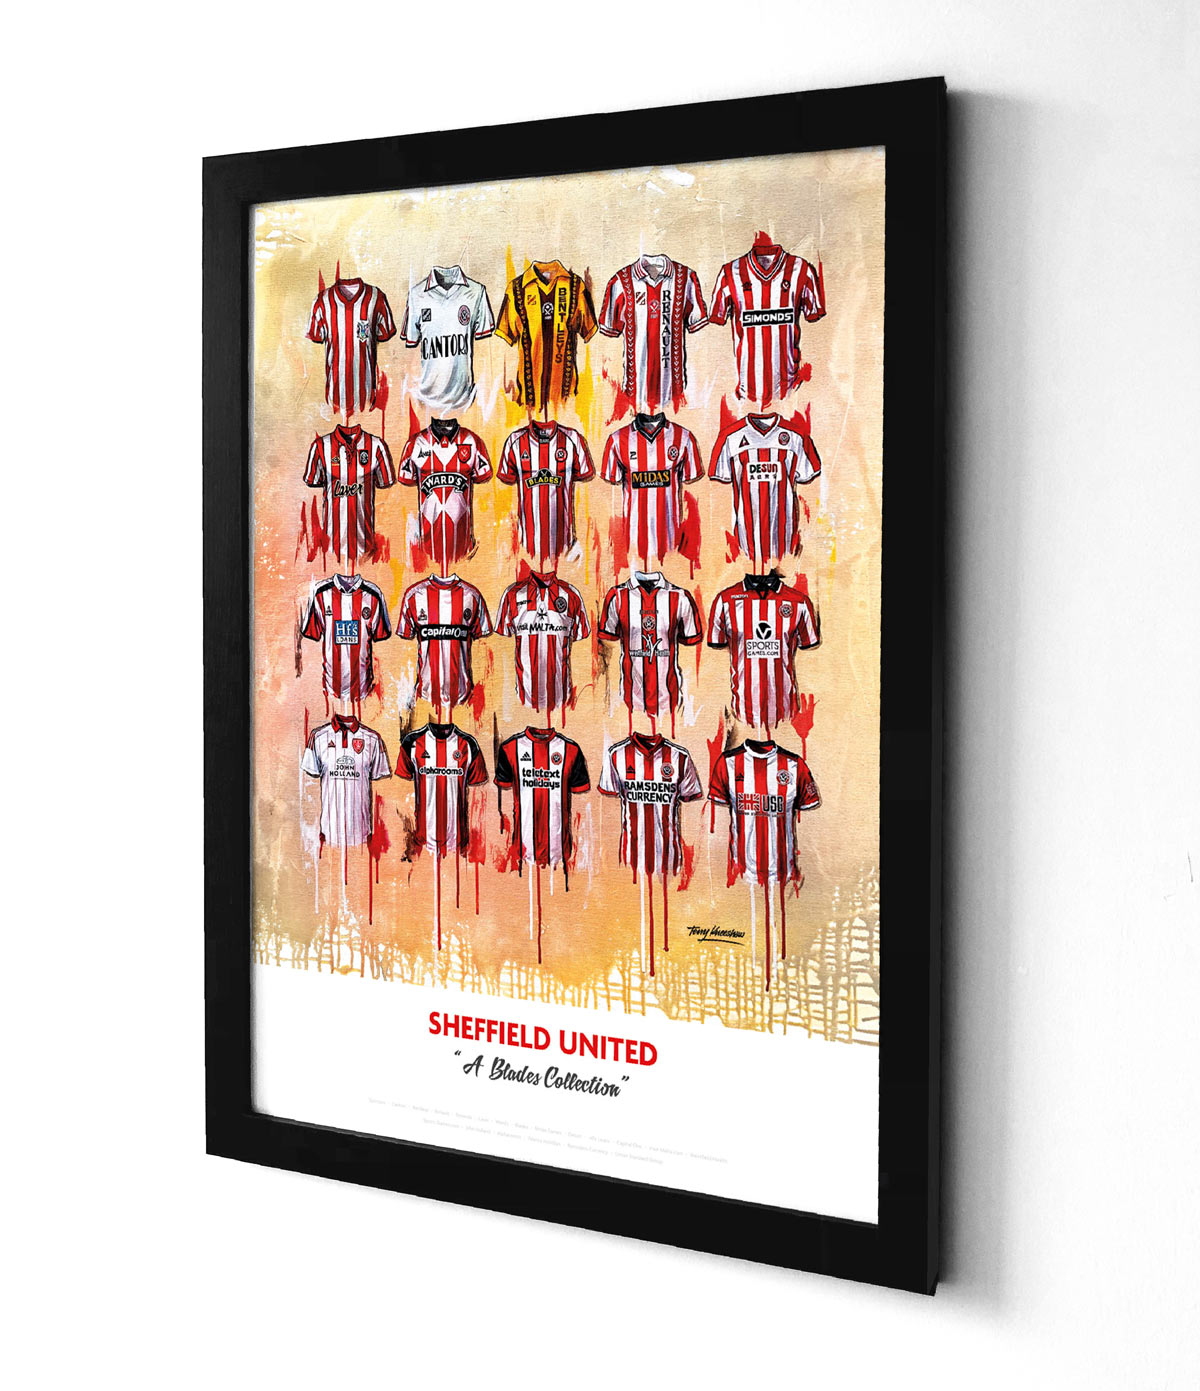 This personalised A2 limited edition print artwork by Terry Kneeshaw features 20 iconic Sheffield United team shirts. From classic red and white stripes to more modern designs, this print captures the essence of Sheffield United's rich footballing heritage. The perfect addition to any sports fan's collection, this artwork is a true celebration of one of England's most historic football clubs.